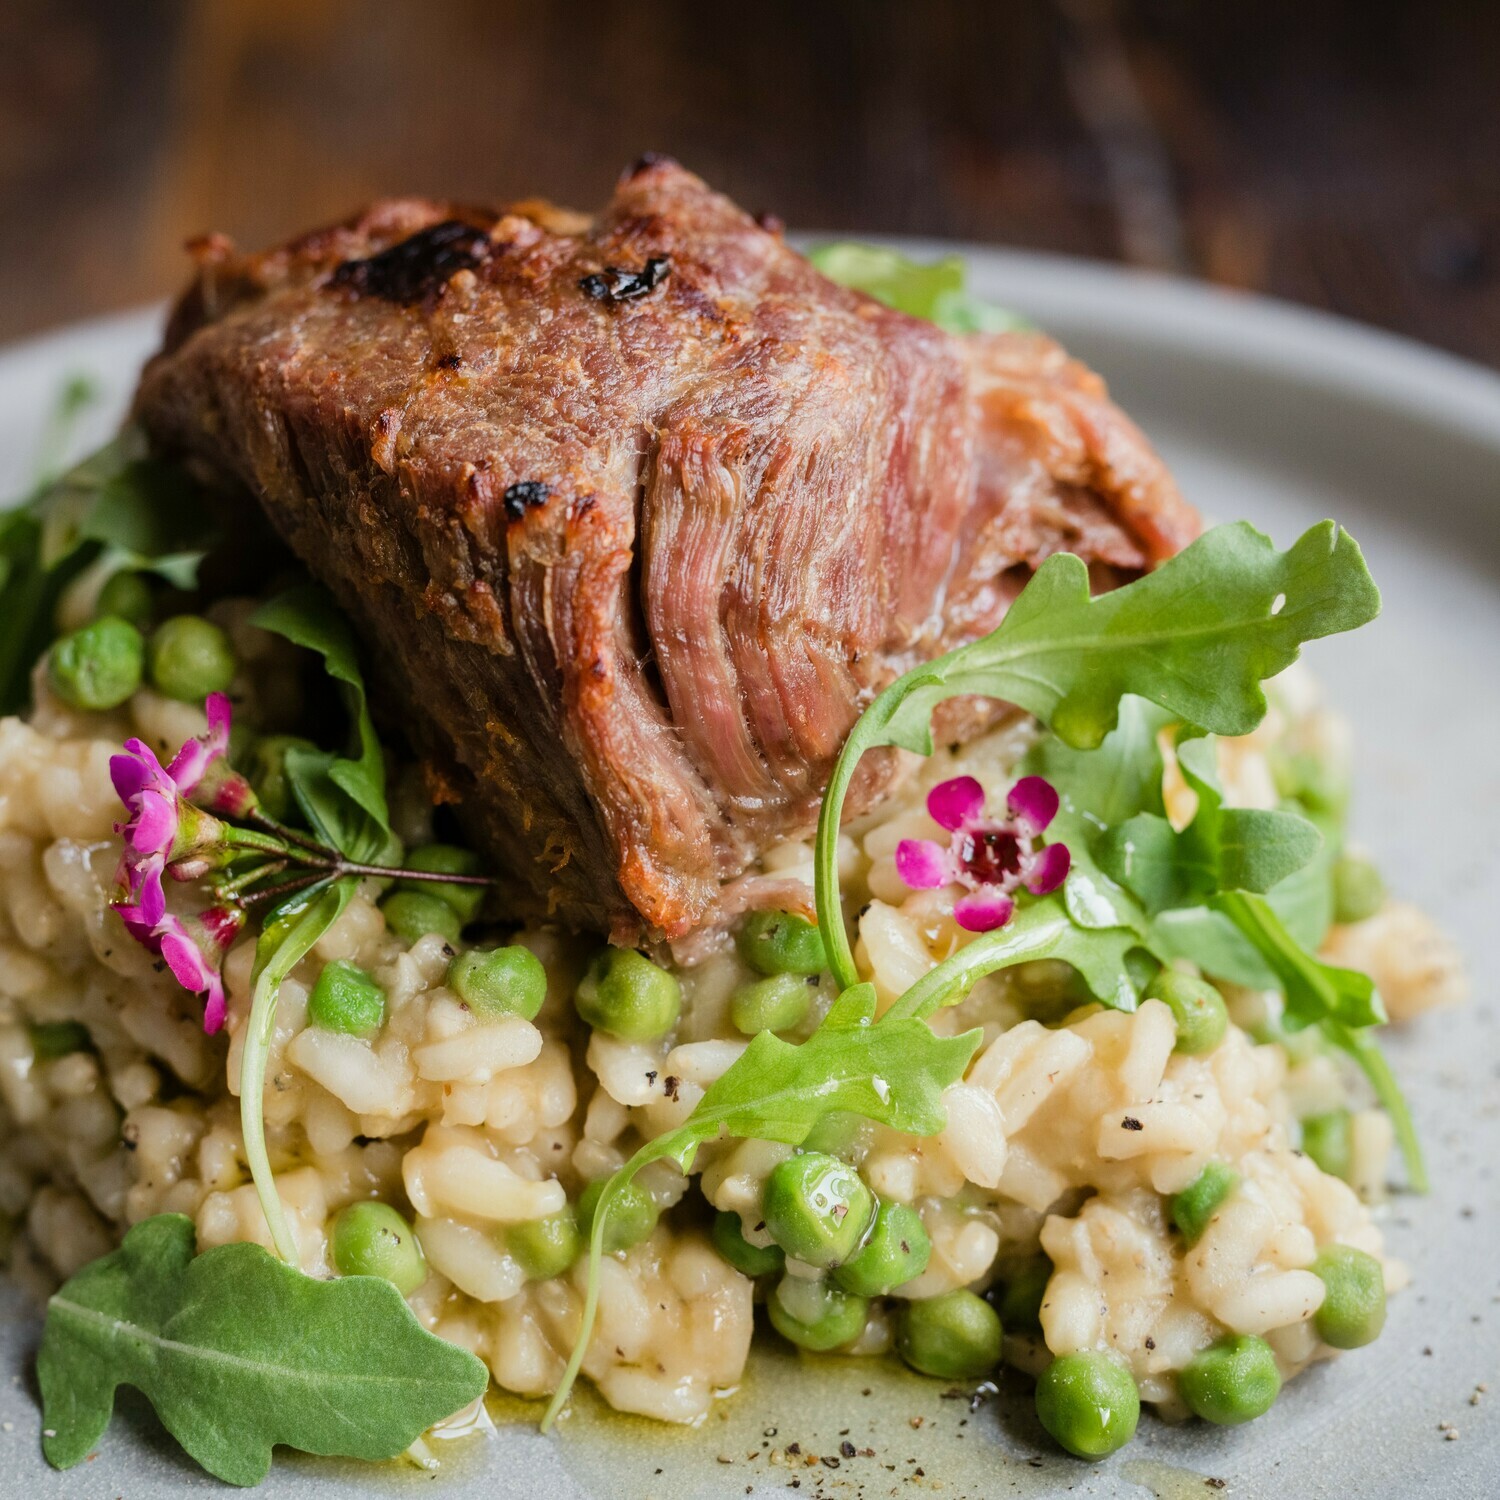 Sweet Pea Risotto with Roasted Pork Shoulder | Jun 11th & 12th | Serves 4